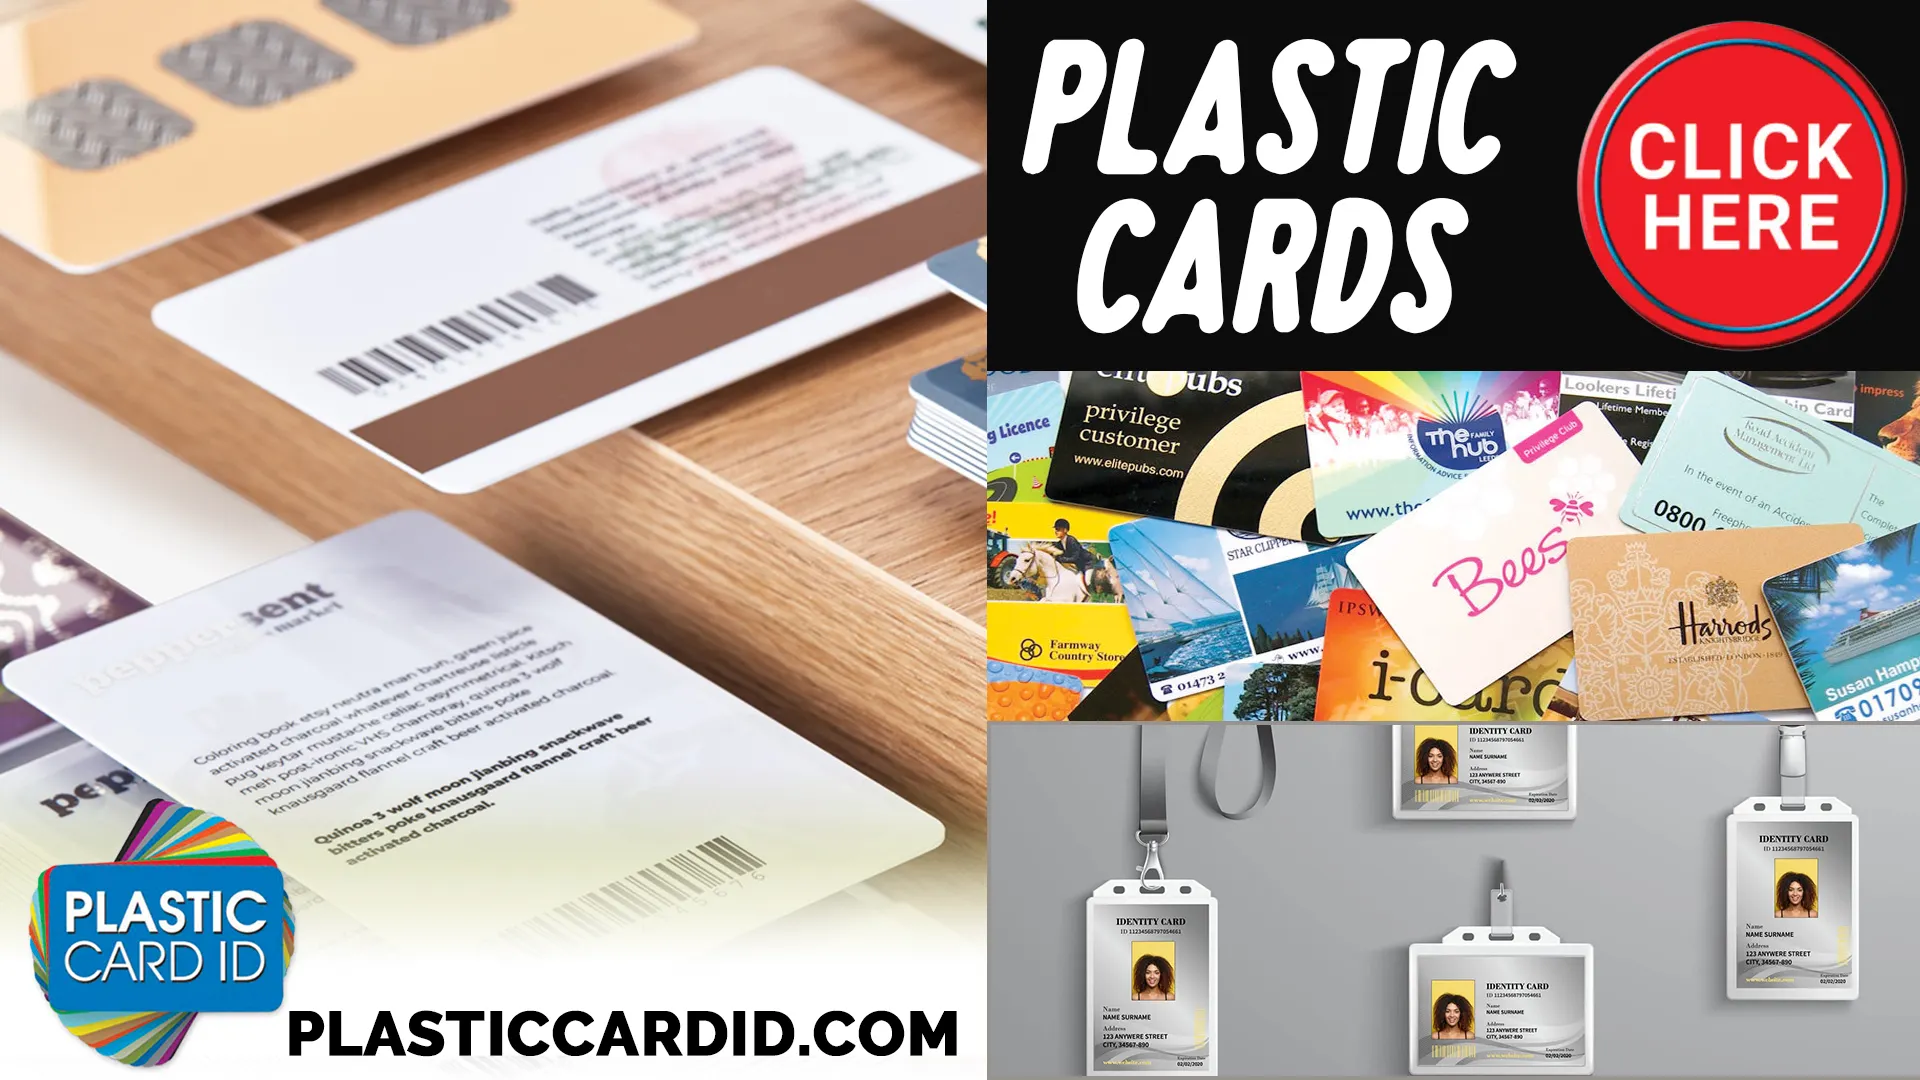 Premium Quality Meets Practicality in Our Plastic Cards